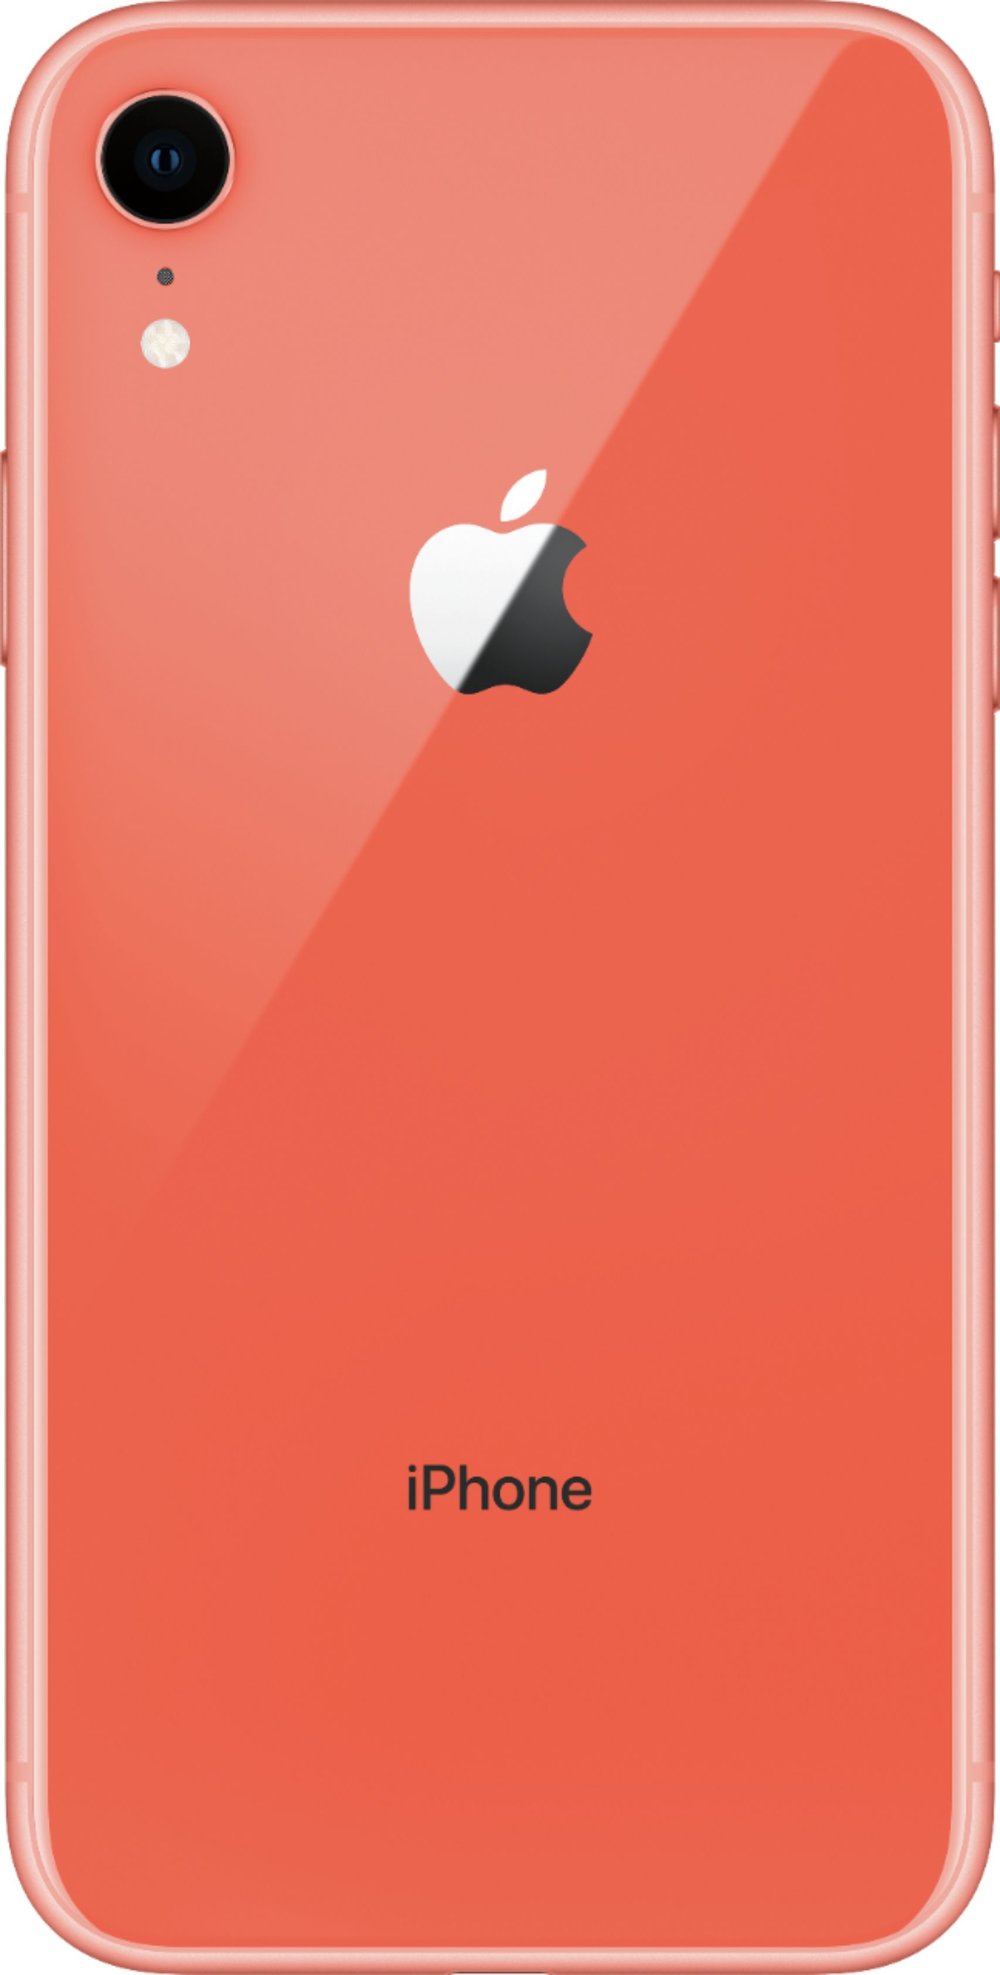 Coral-consumer-products-iphone.jpg